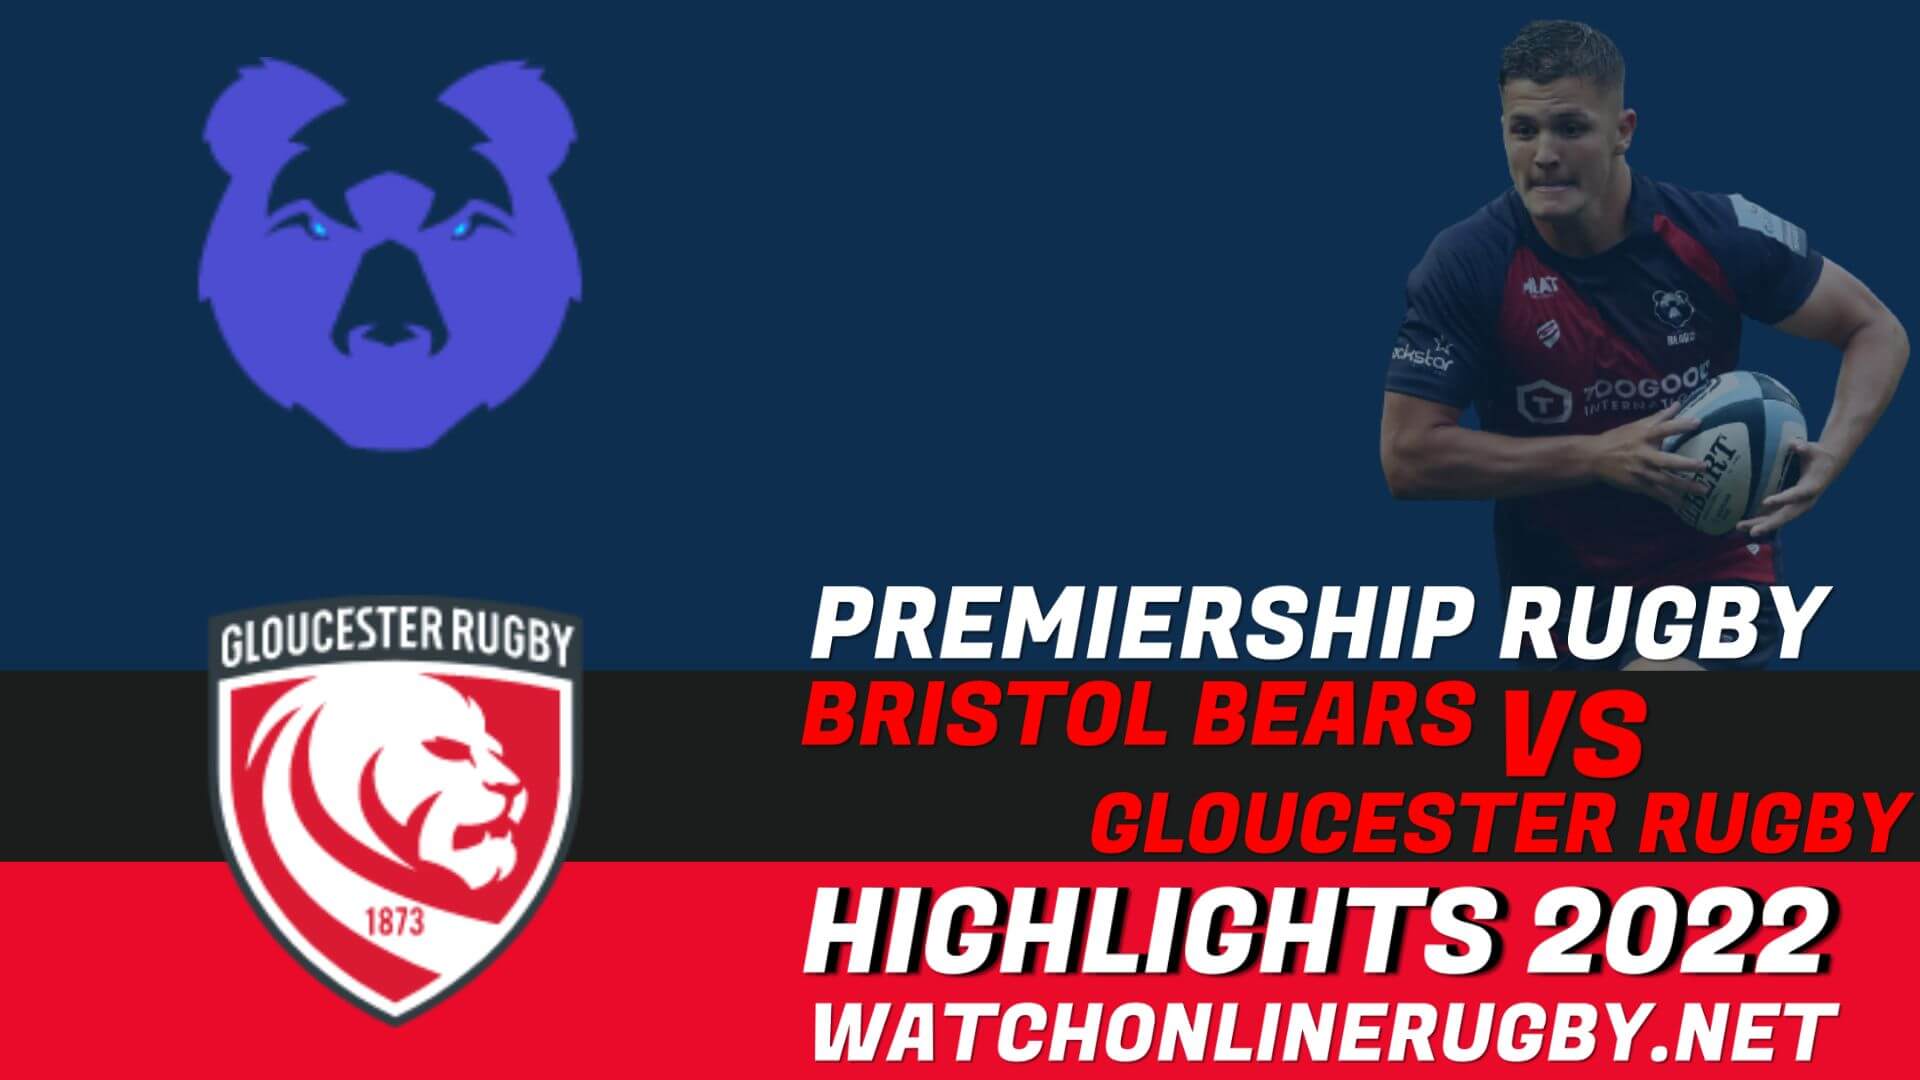 Bristol Bears Vs Gloucester Rugby Premiership Rugby 2022 RD 23